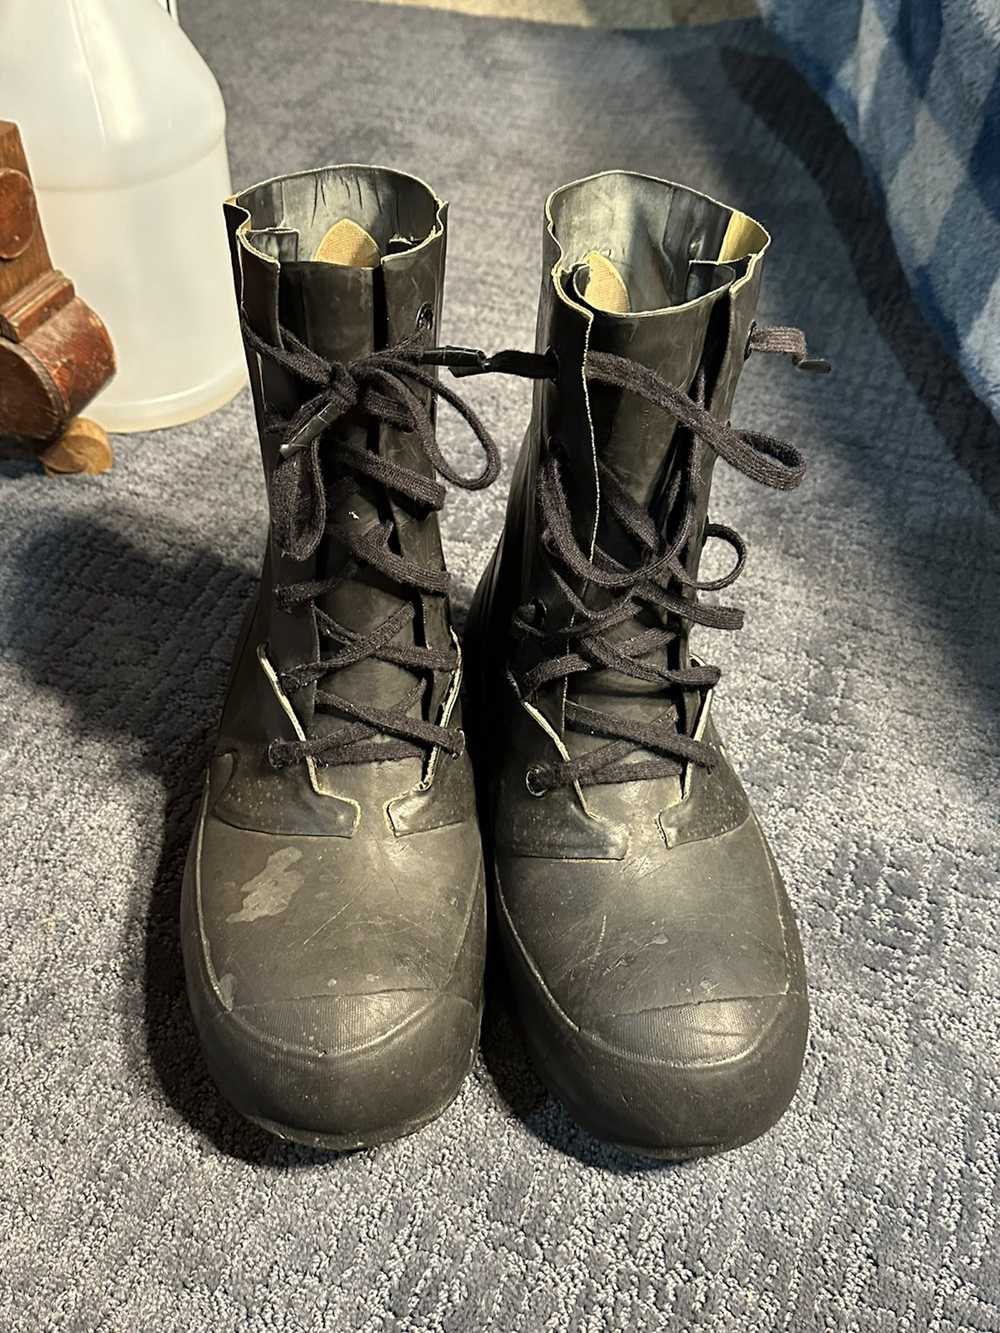 Other military water proof boots - image 1